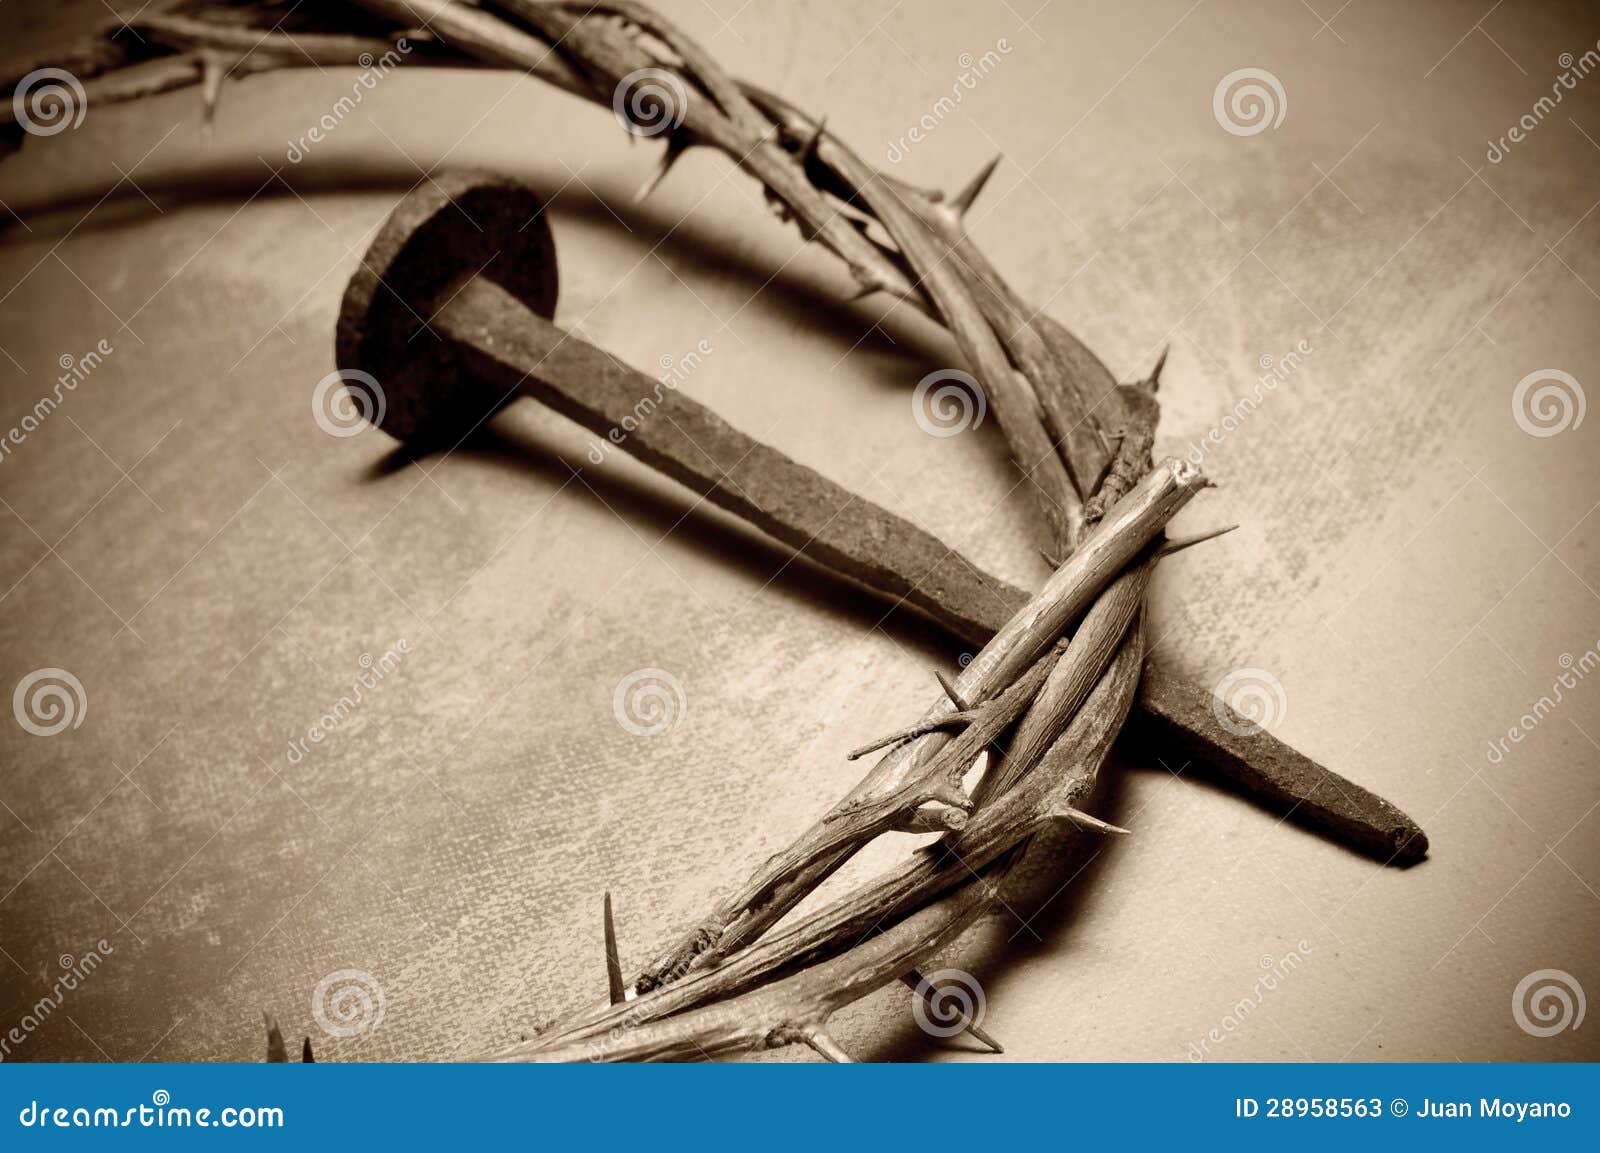 jesus christ crown of thorns and nail